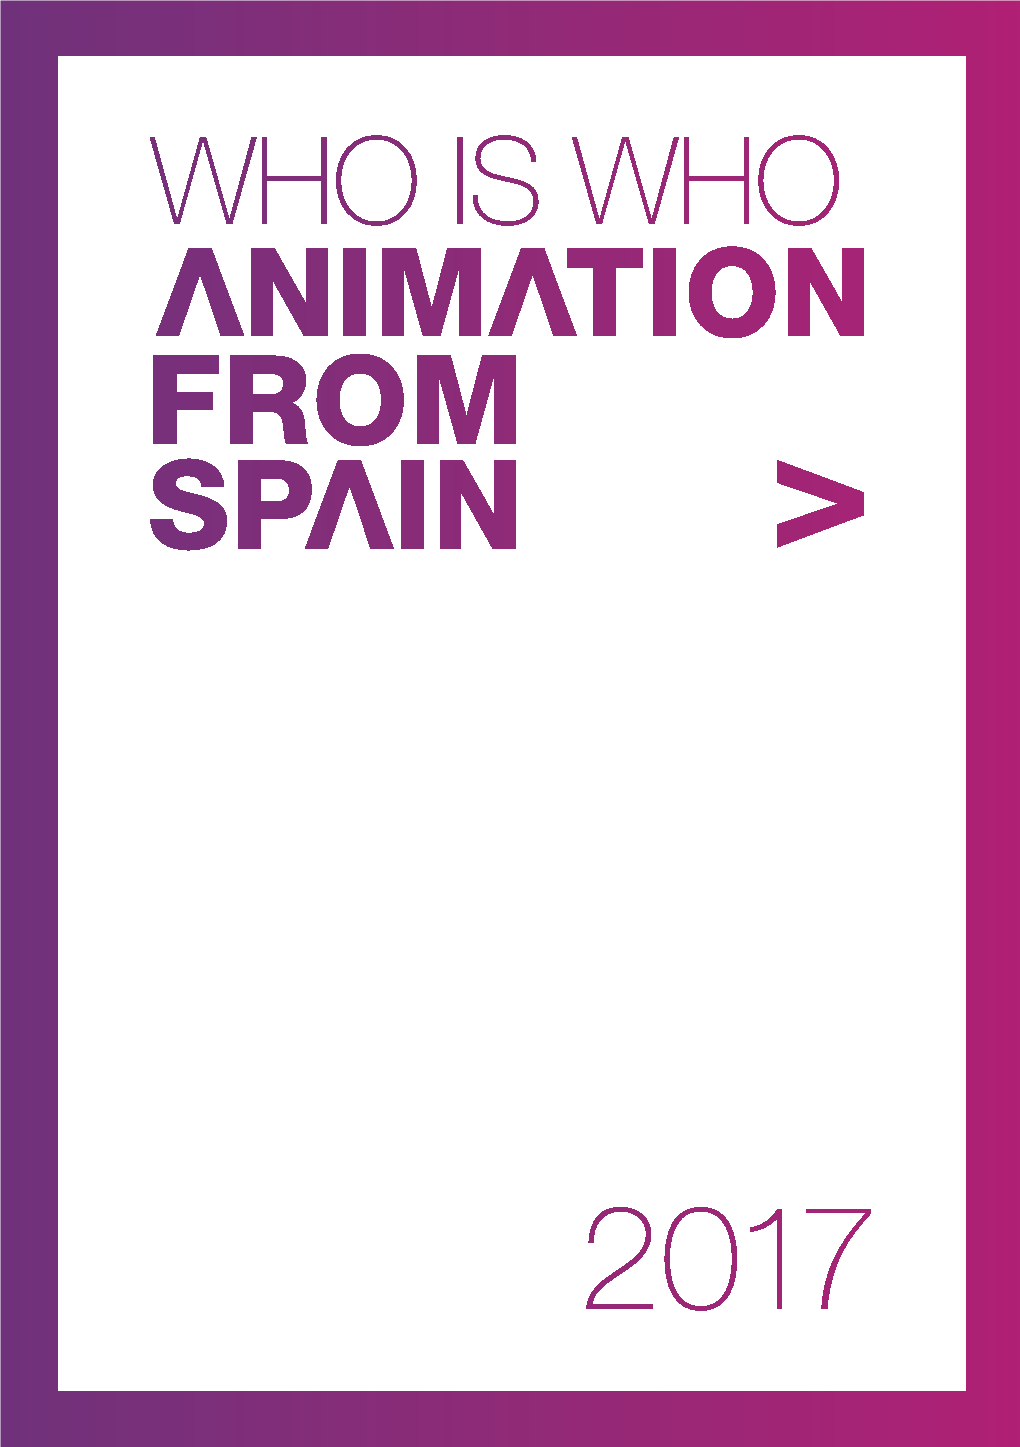 Discover ANIMATION from SPAIN